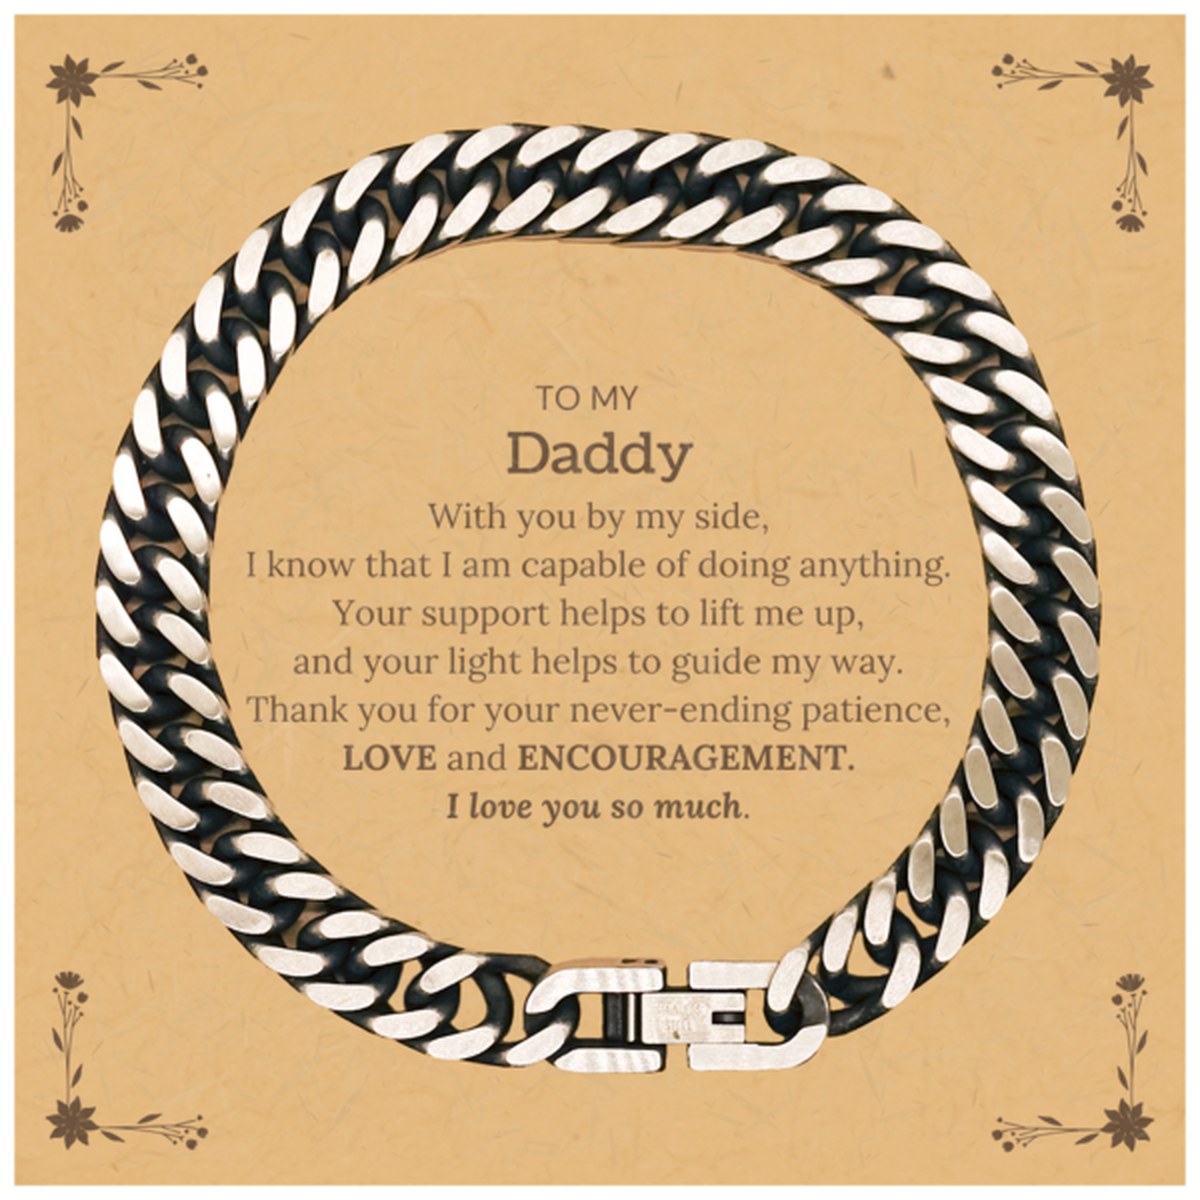 Appreciation Daddy Cuban Link Chain Bracelet Gifts, To My Daddy Birthday Christmas Wedding Keepsake Gifts for Daddy With you by my side, I know that I am capable of doing anything. I love you so much